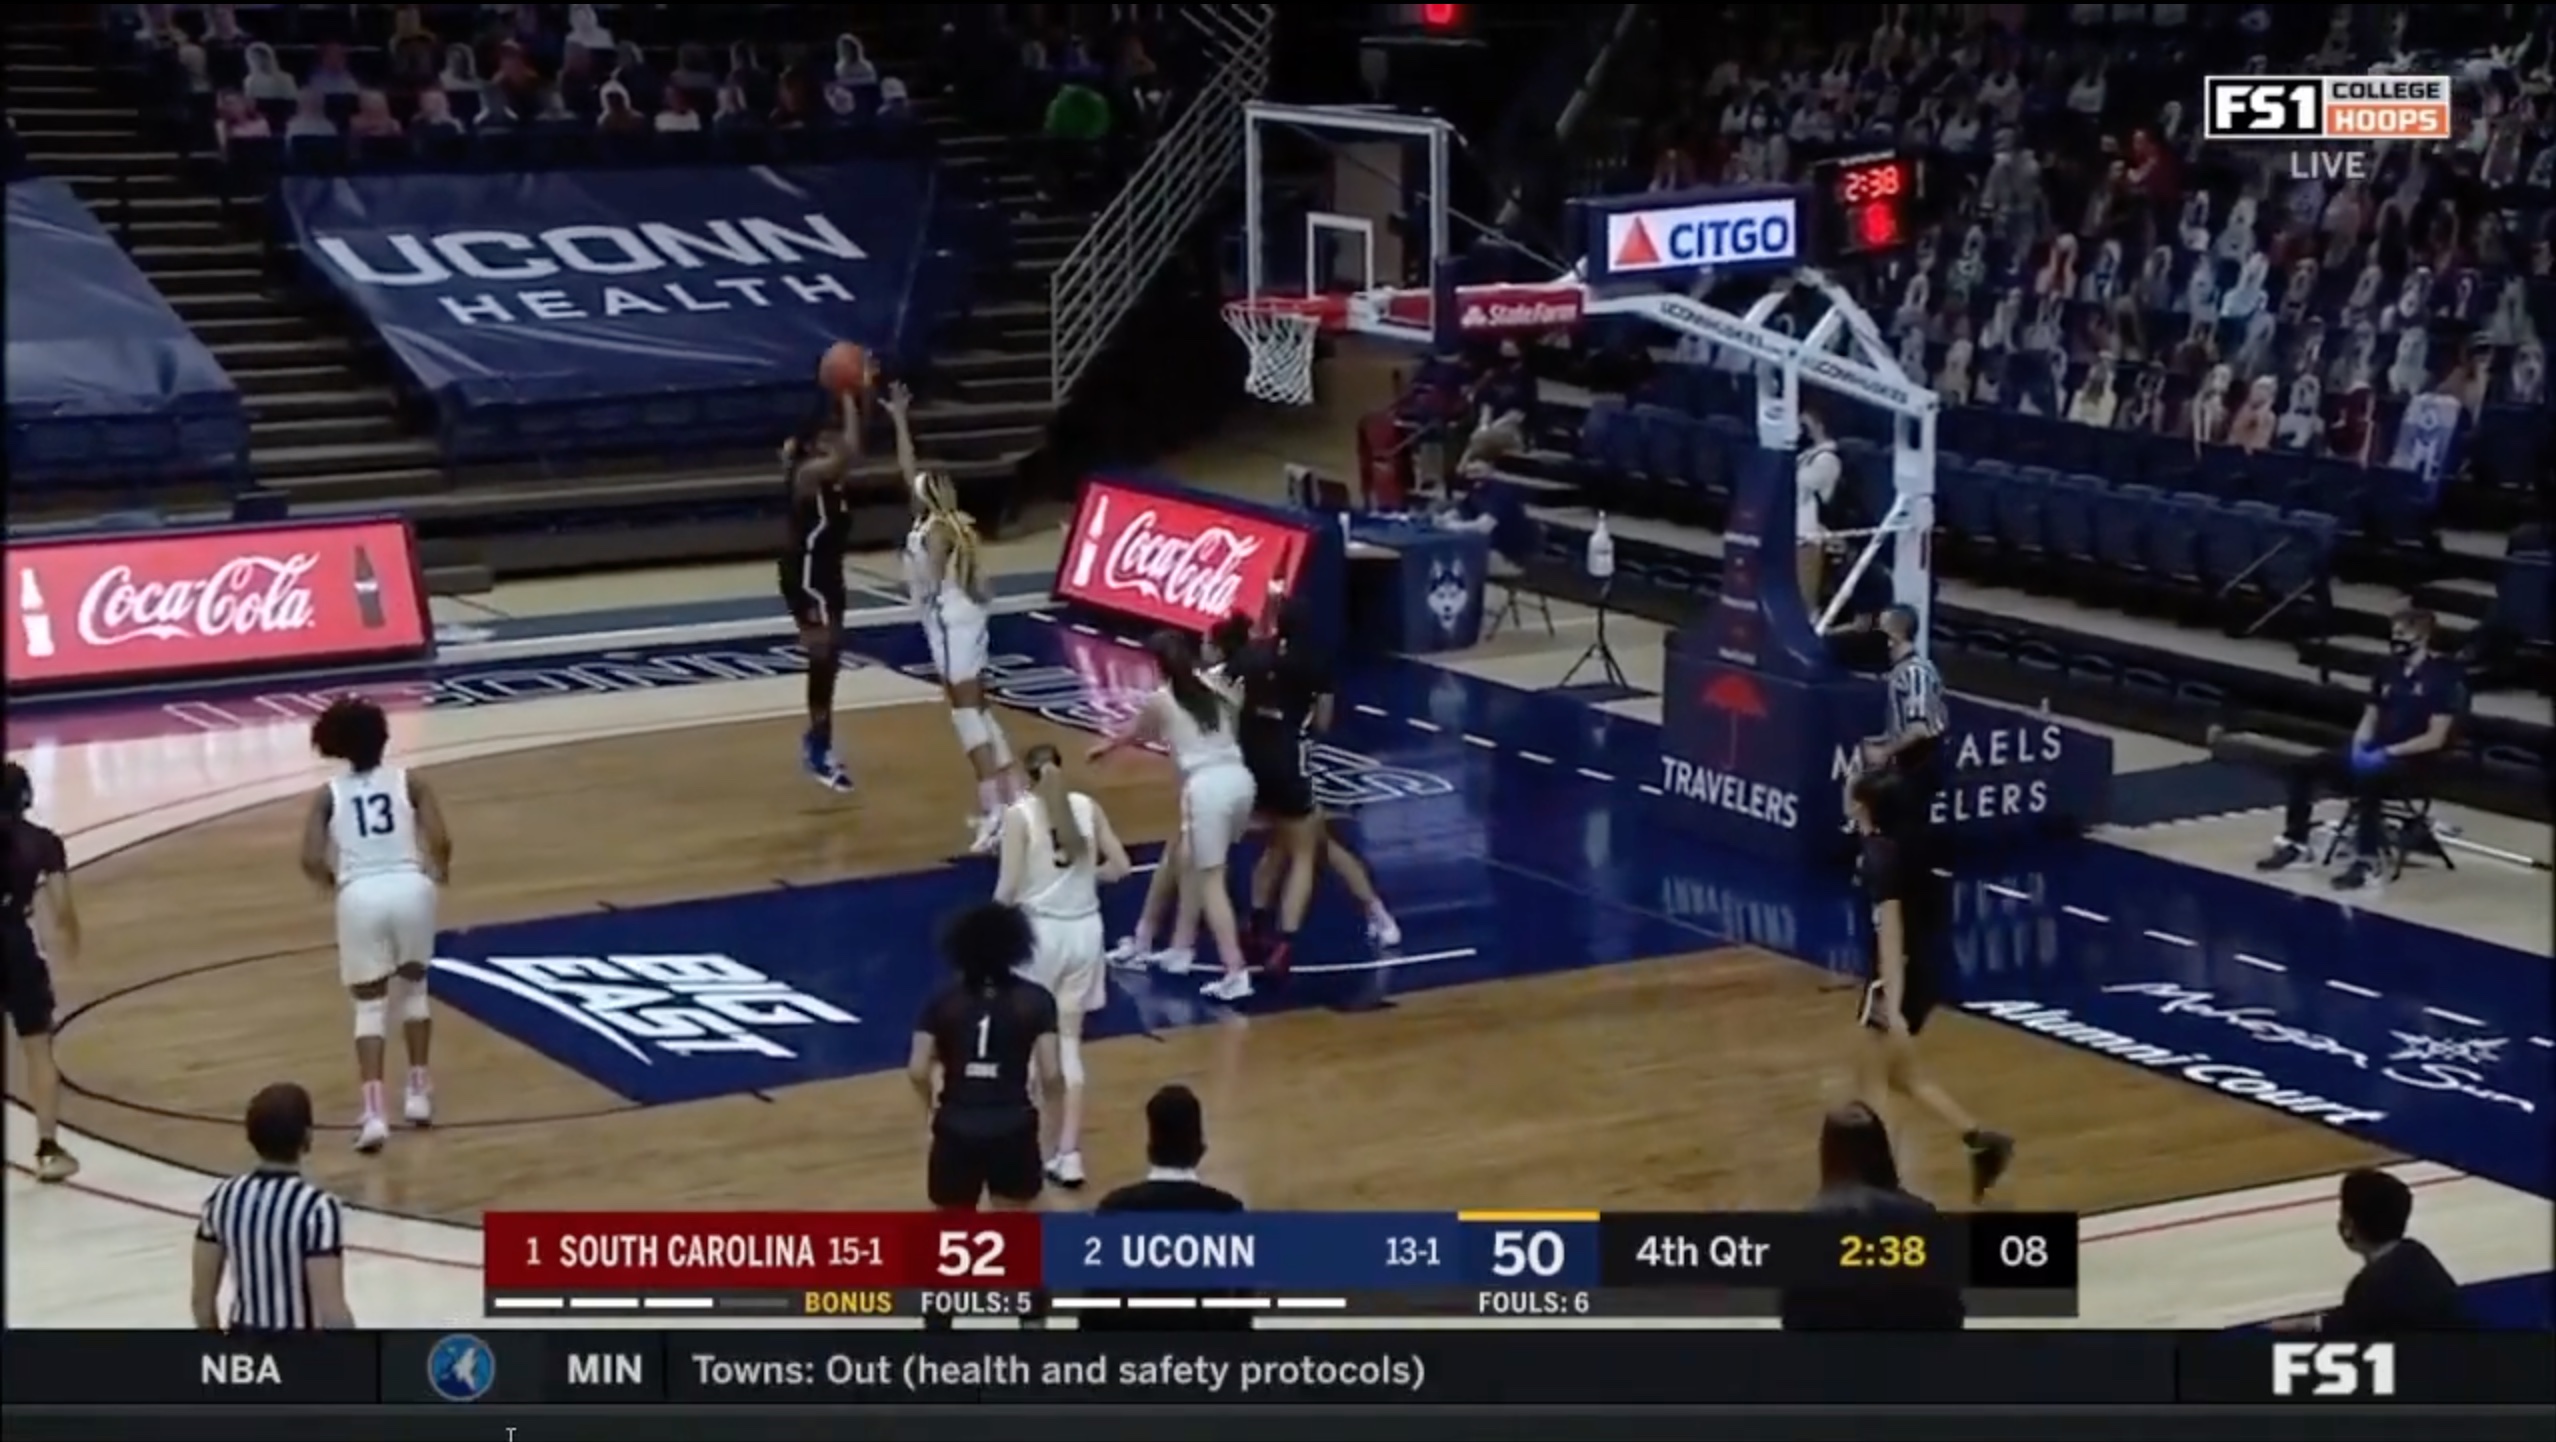 Aliyah Boston shoots over Aaliyah Edwards in South Carolina's game against UConn